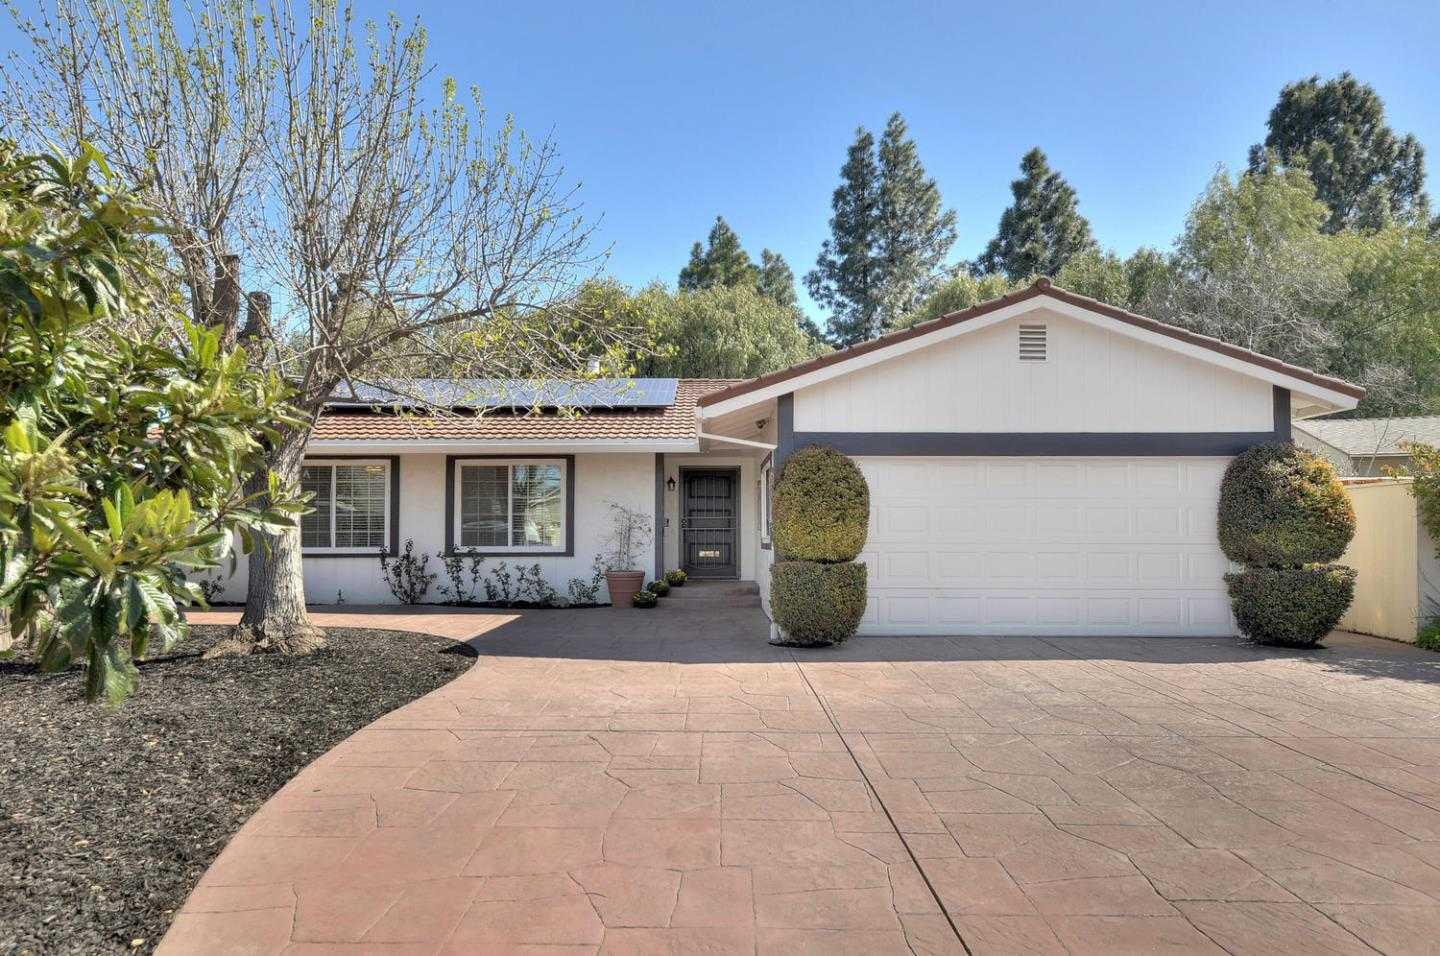 6059 Larchmont CT, SAN JOSE, Single Family Home,  sold, Kristen Constantino, Realty World - San Jose Realty